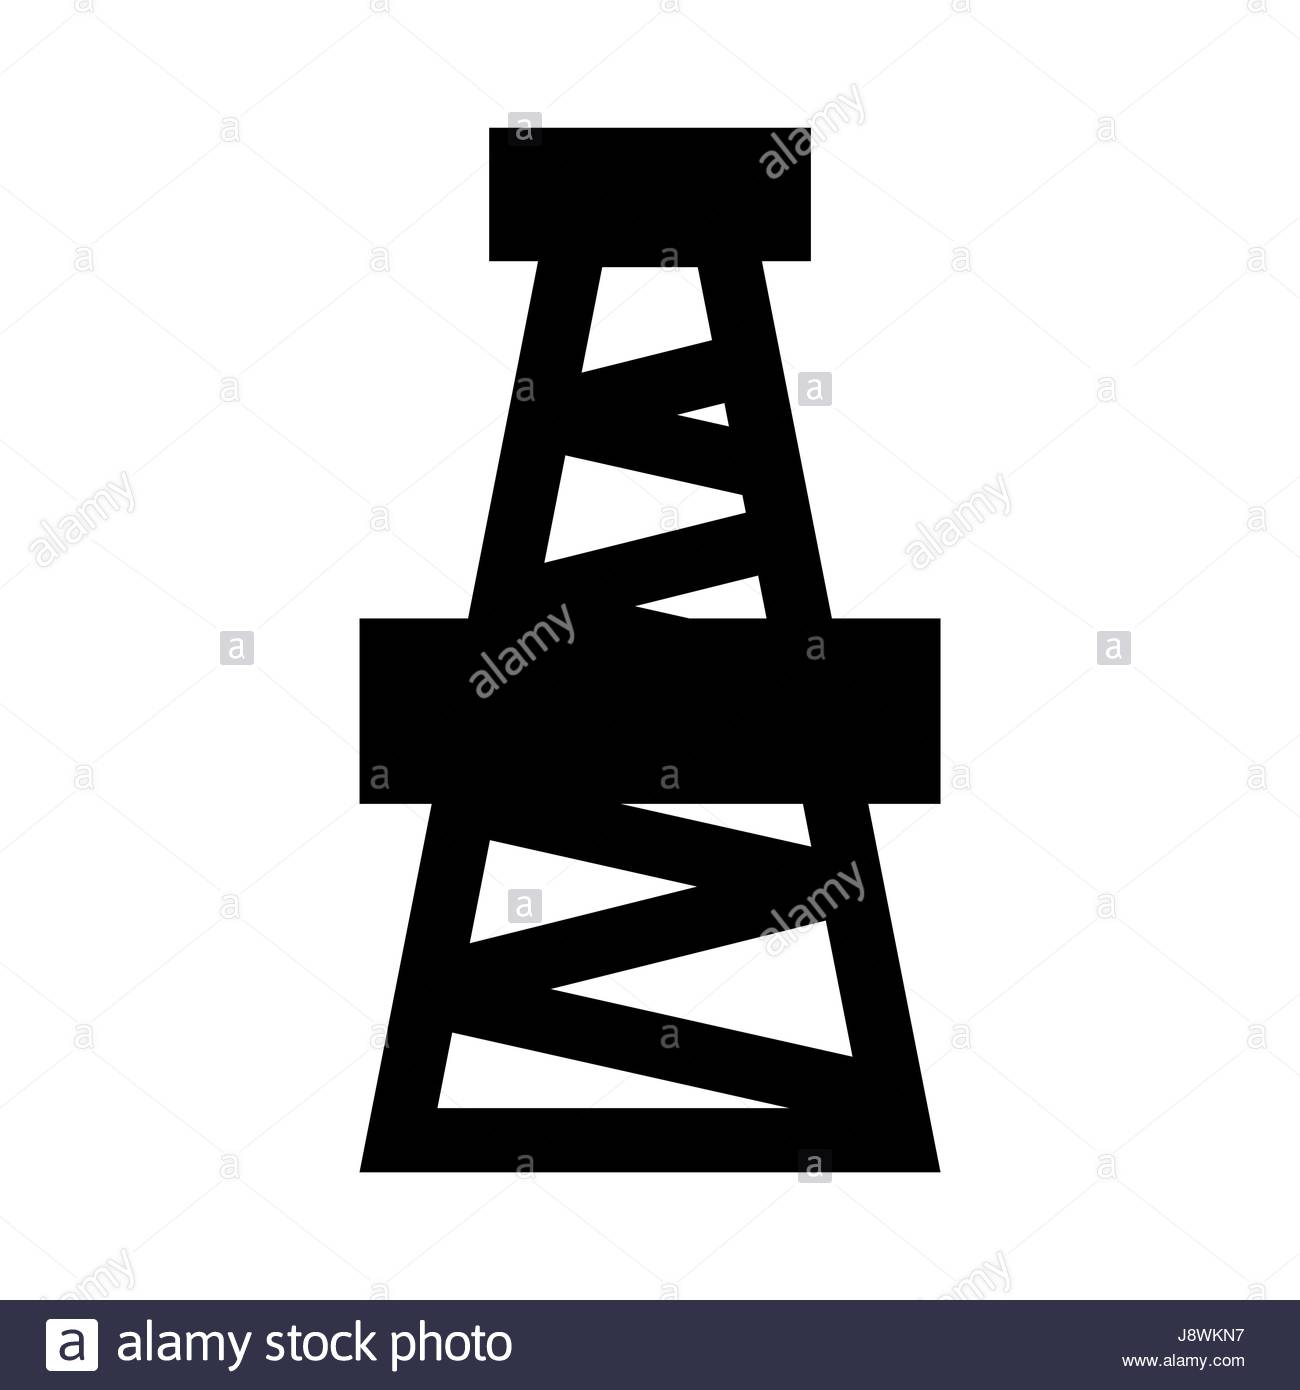 Energy, industry, oil, rig icon | Icon search engine